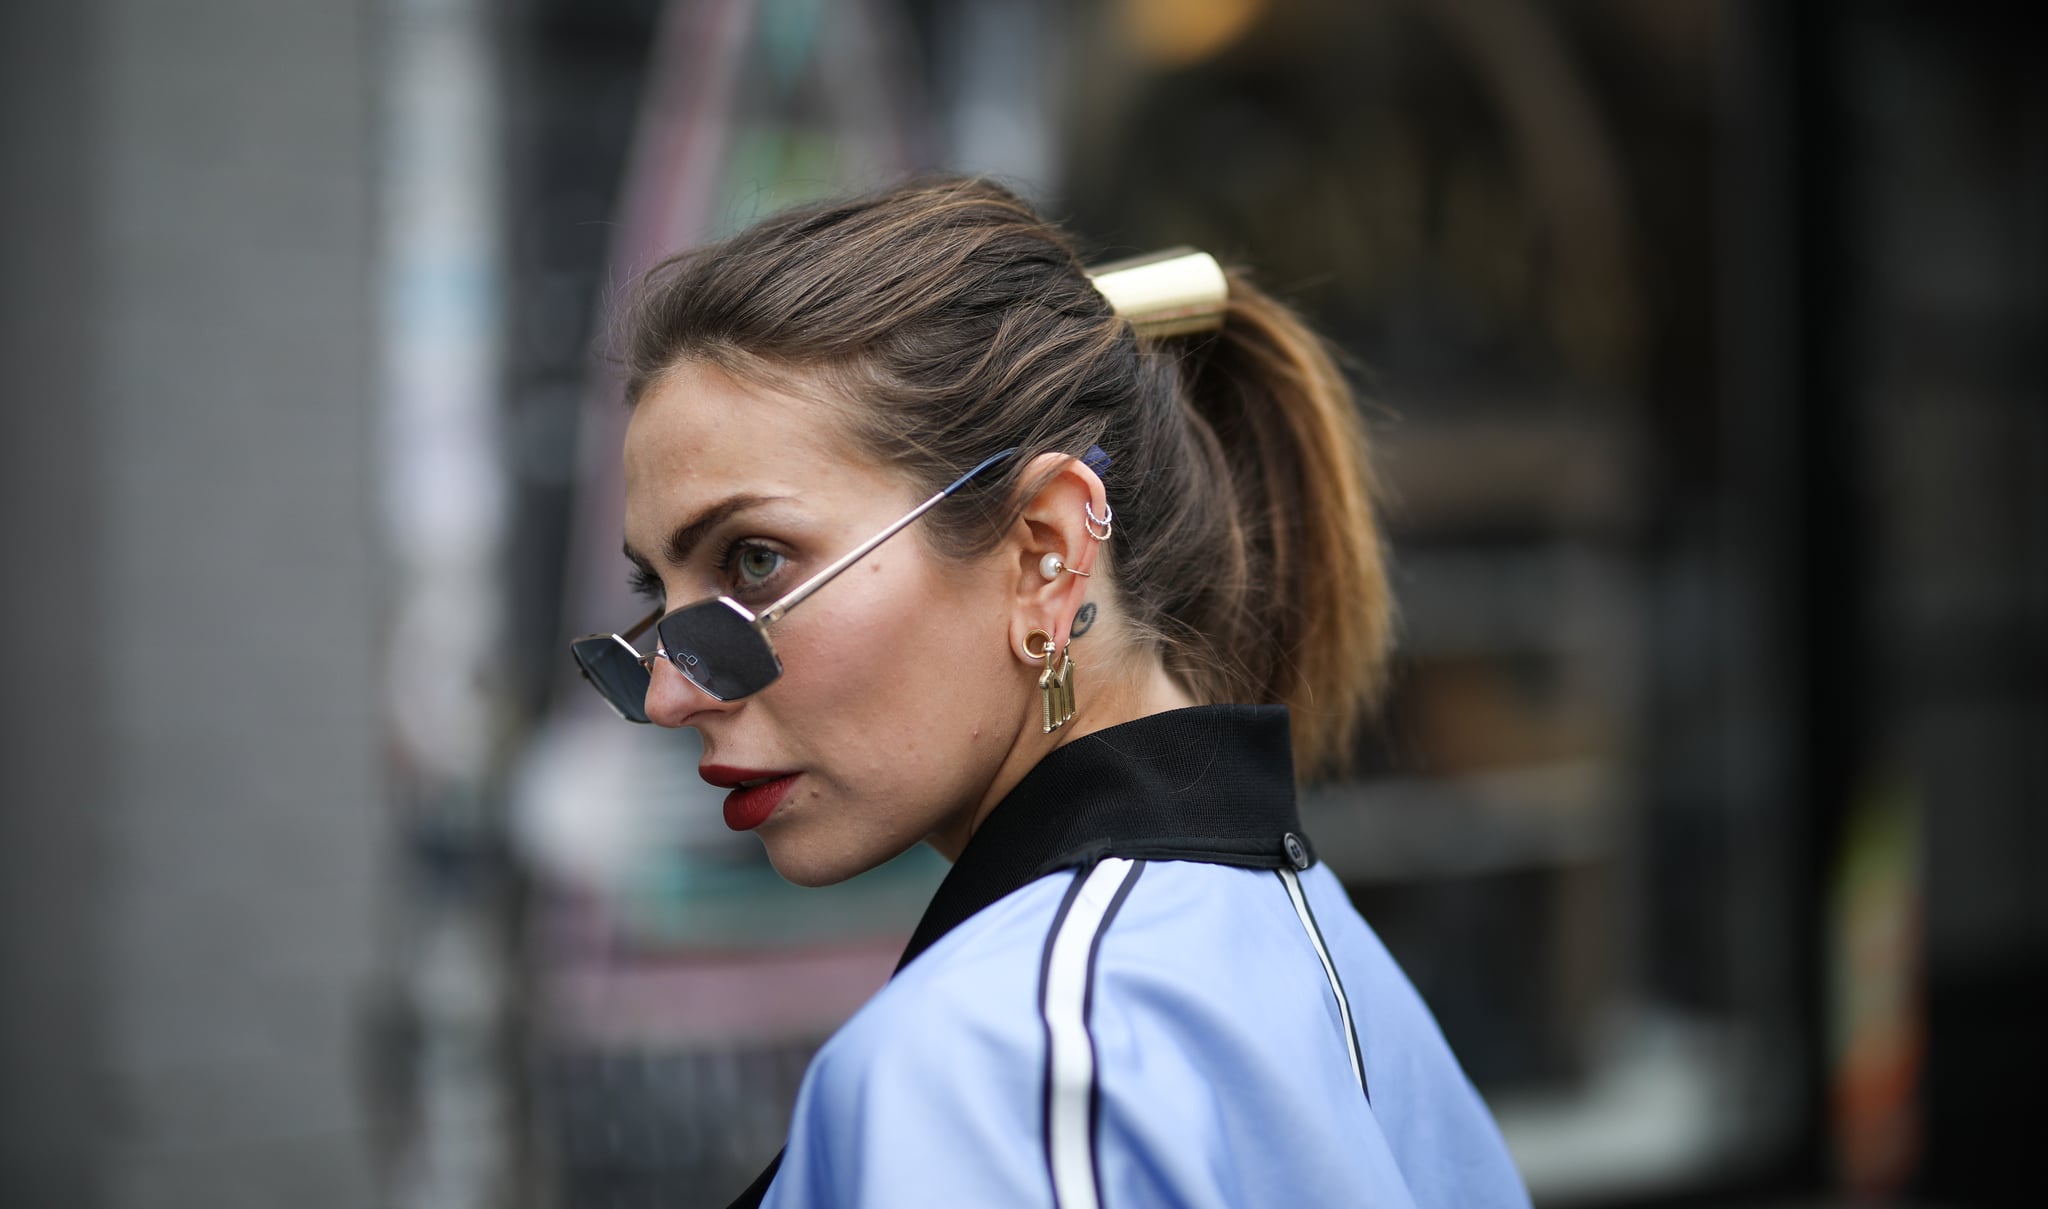 Slicked-Back Ponytail Trend Post Stay-at-Home Orders | POPSUGAR Beauty UK